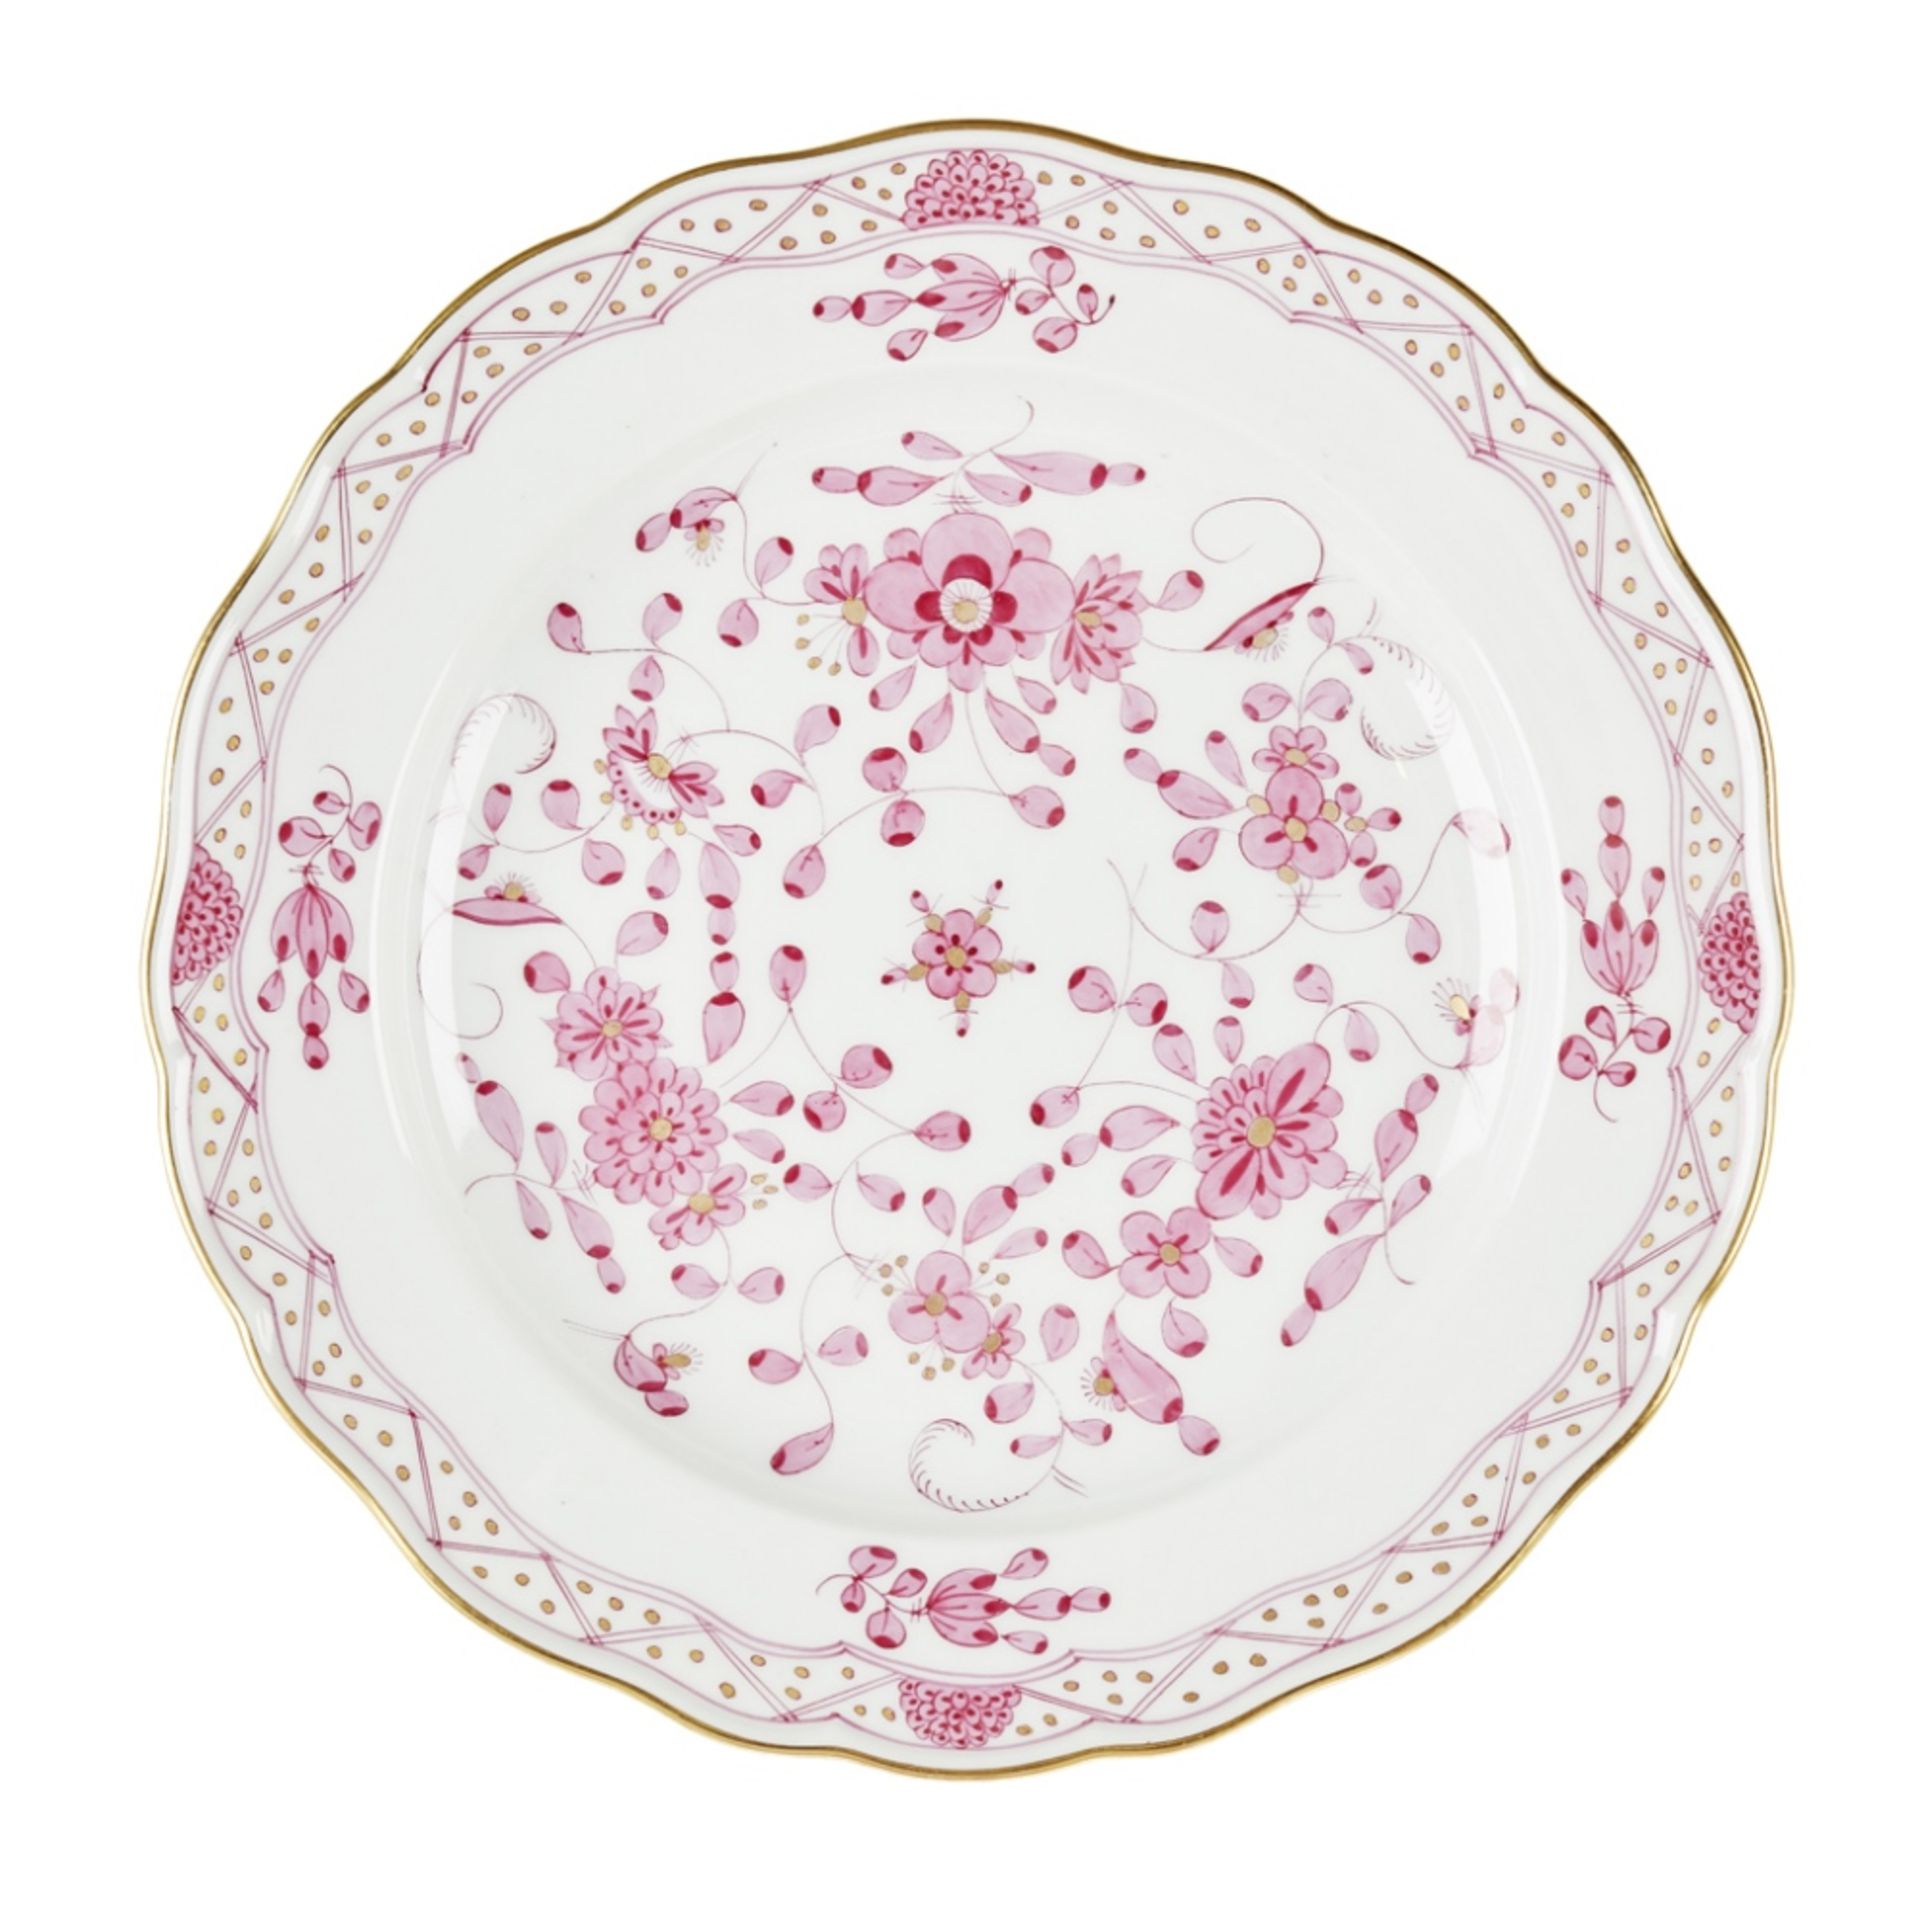 MEISSEN 'INDIAN PINK' PORCELAIN PART DINNER, TEA AND COFFEE SERVICELATE 19TH/ EARLY 20TH CENTURY - Image 4 of 7